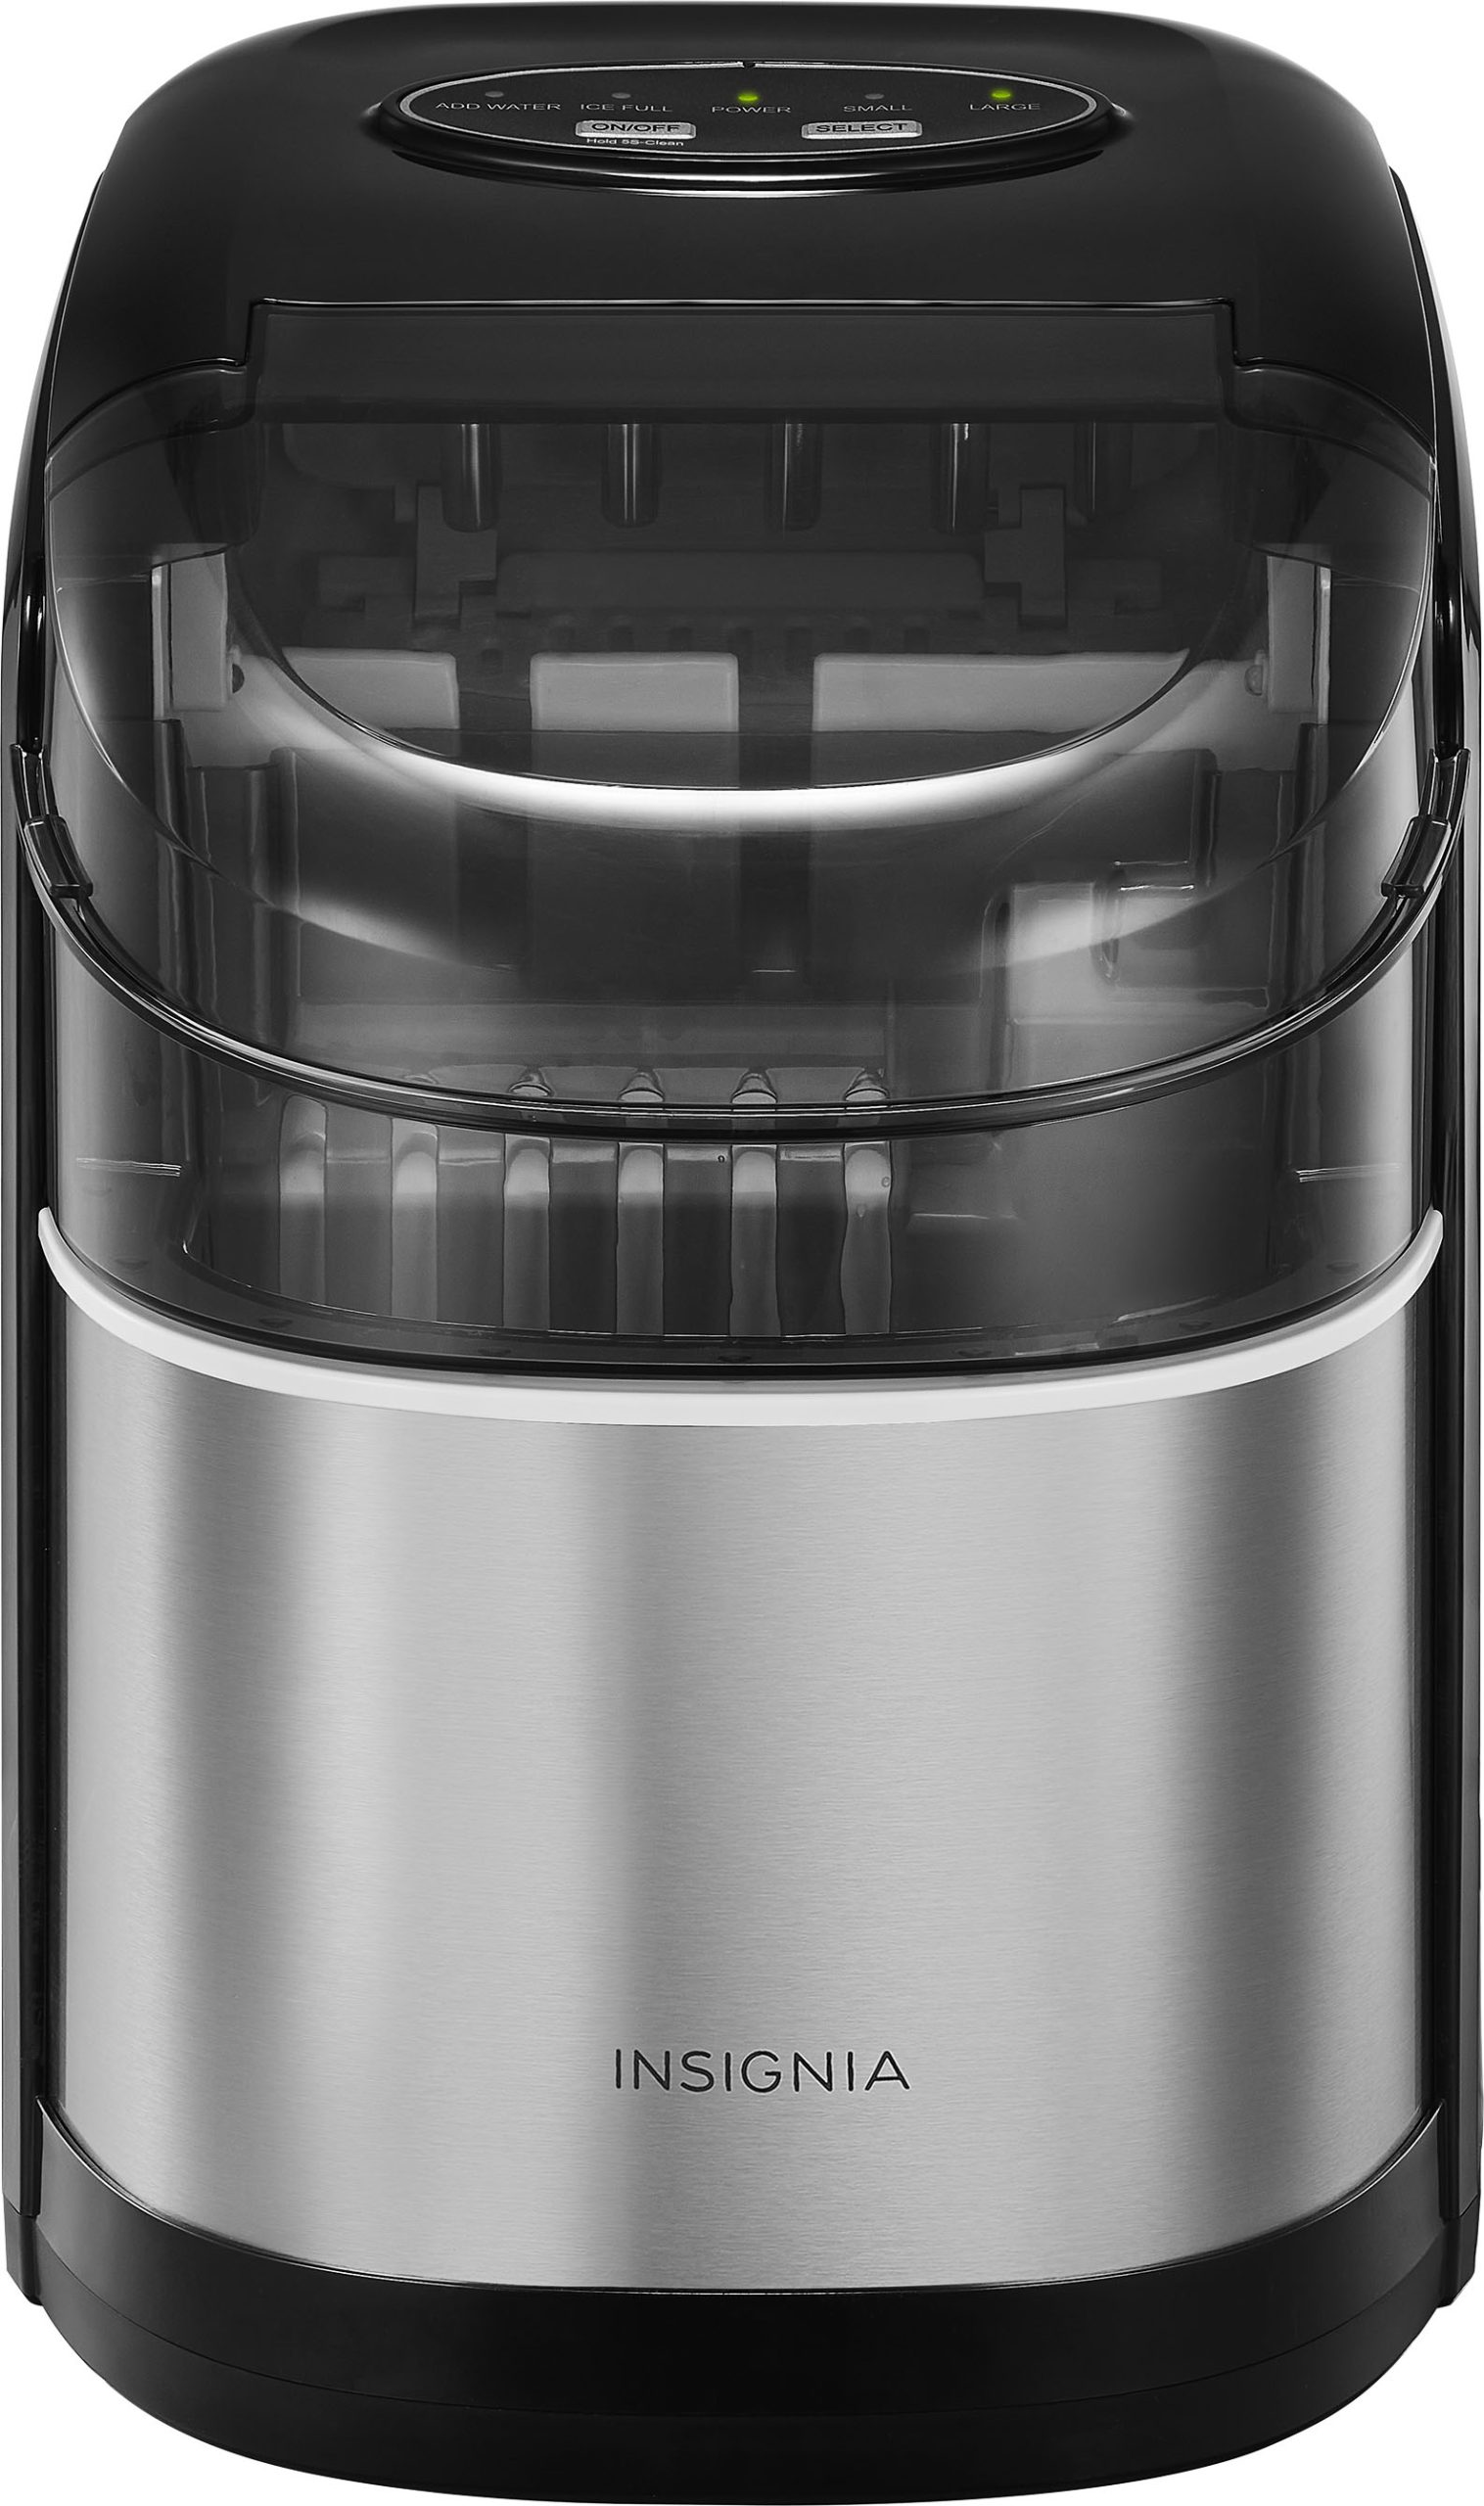 Insignia™ – Portable Icemaker 33 lb. With Auto Shut-Off – Stainless steel – Just $129.99 at Best Buy